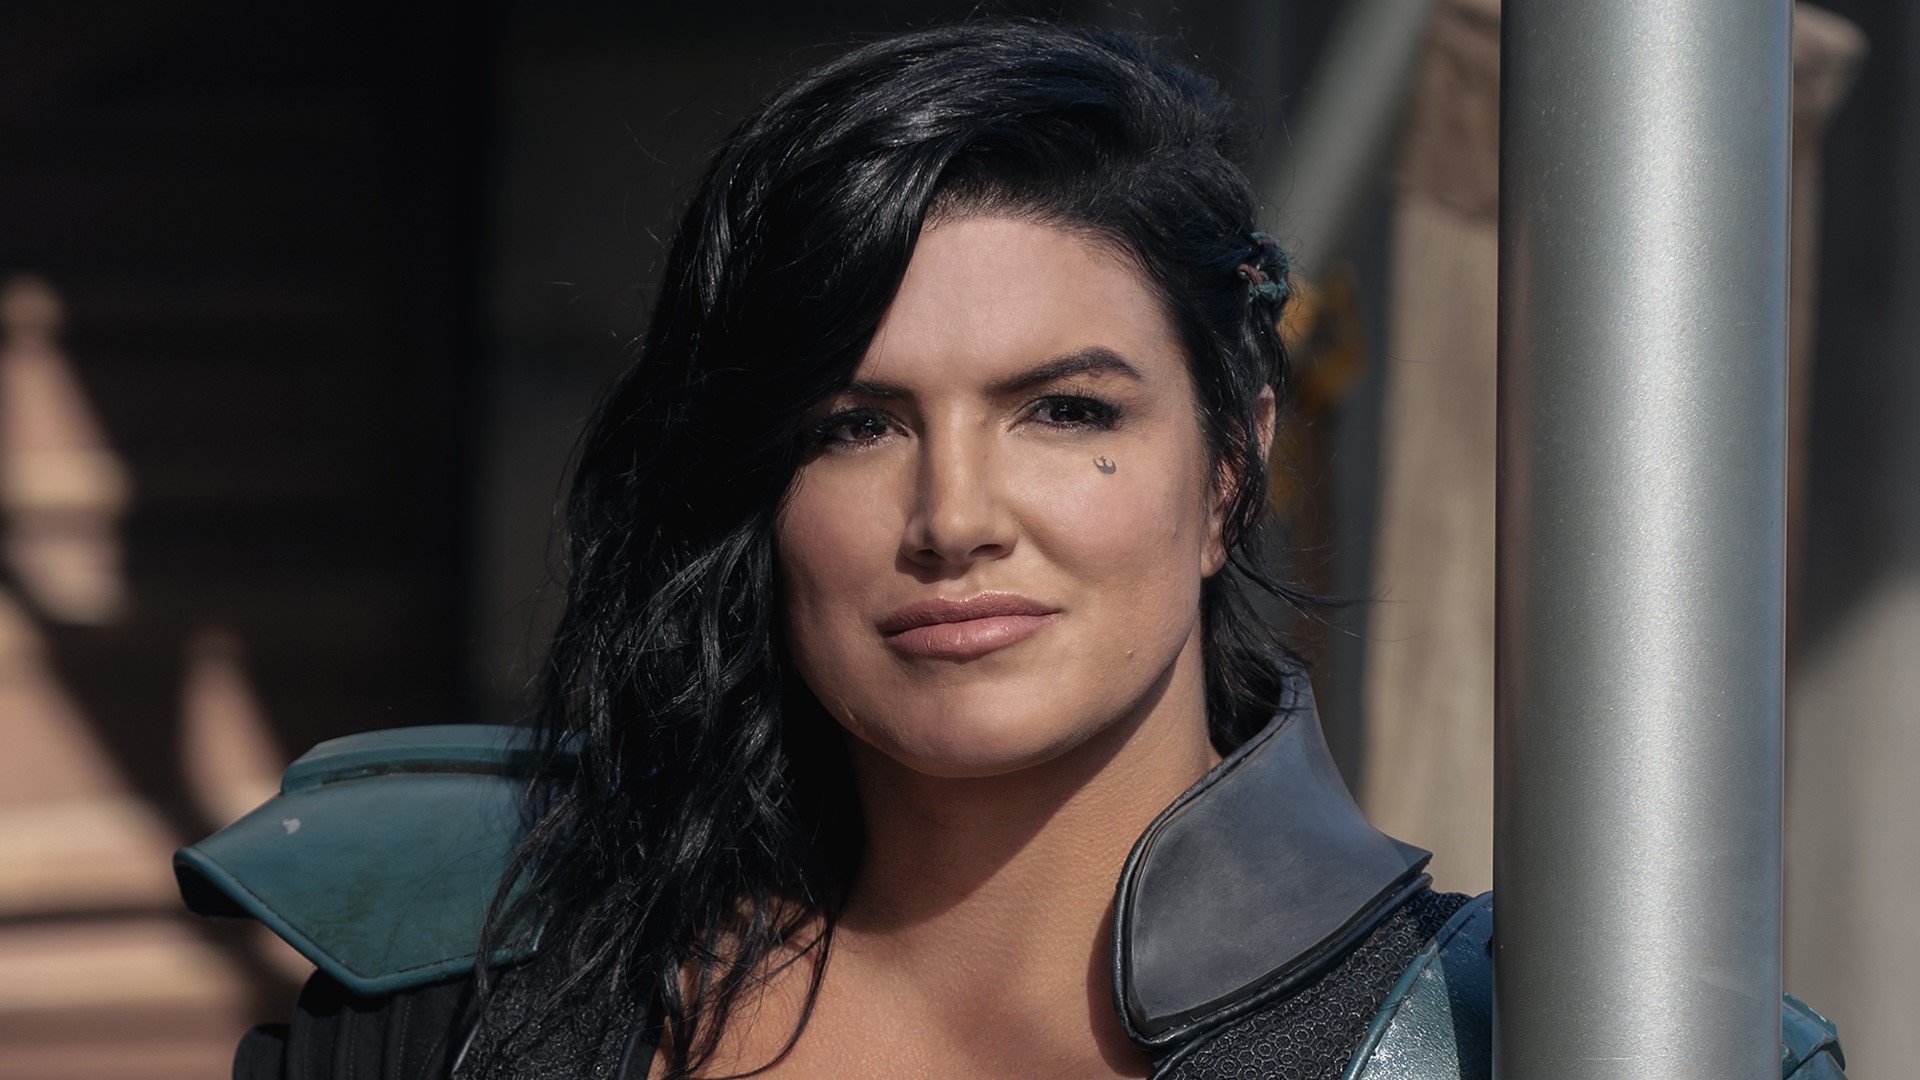 What Did Gina Carano Post Before Firing From The Mandalorian